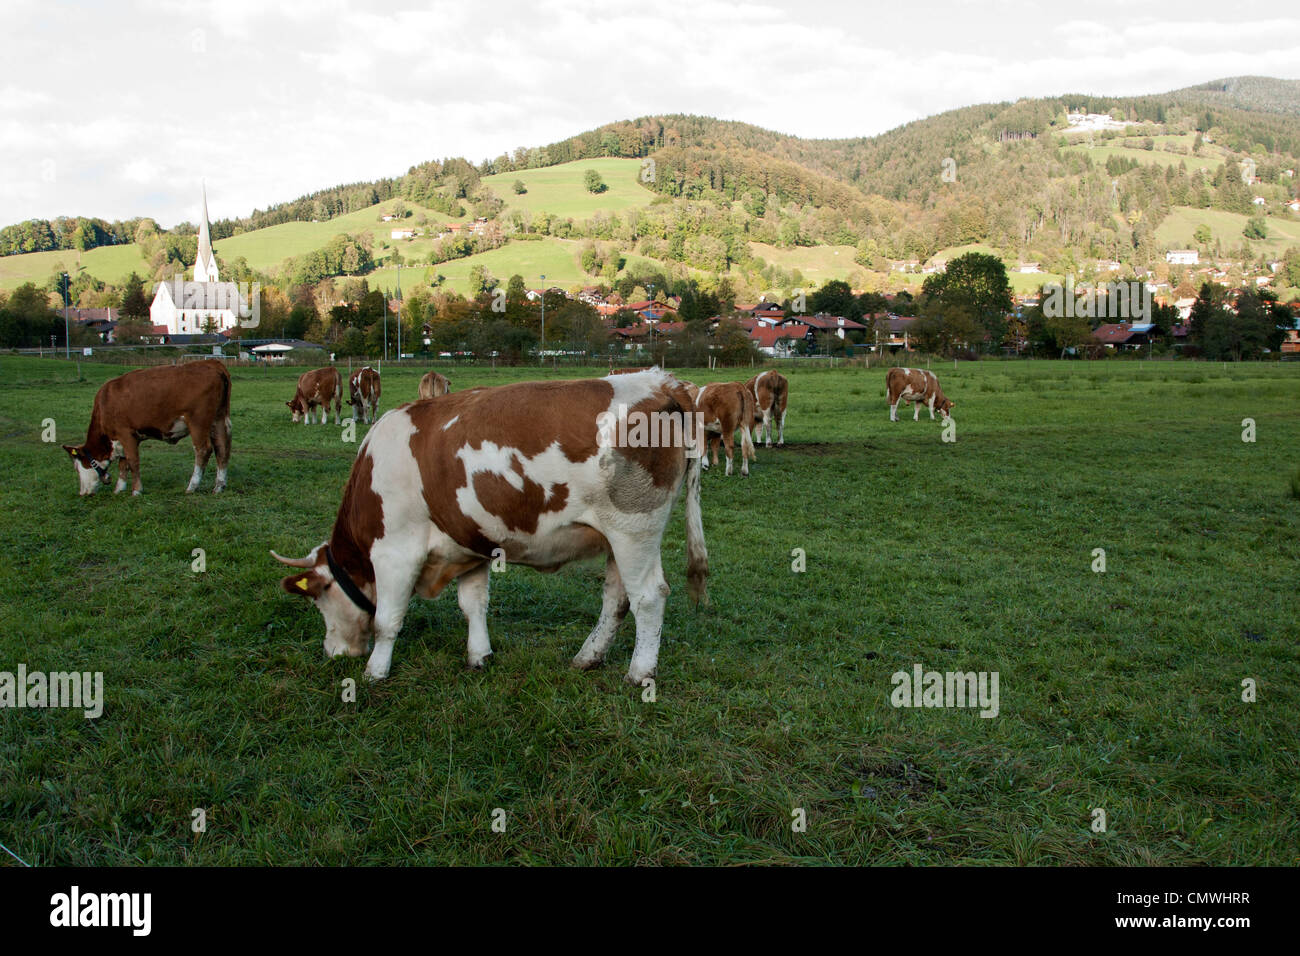 Cows grazing in an open field Stock Photo